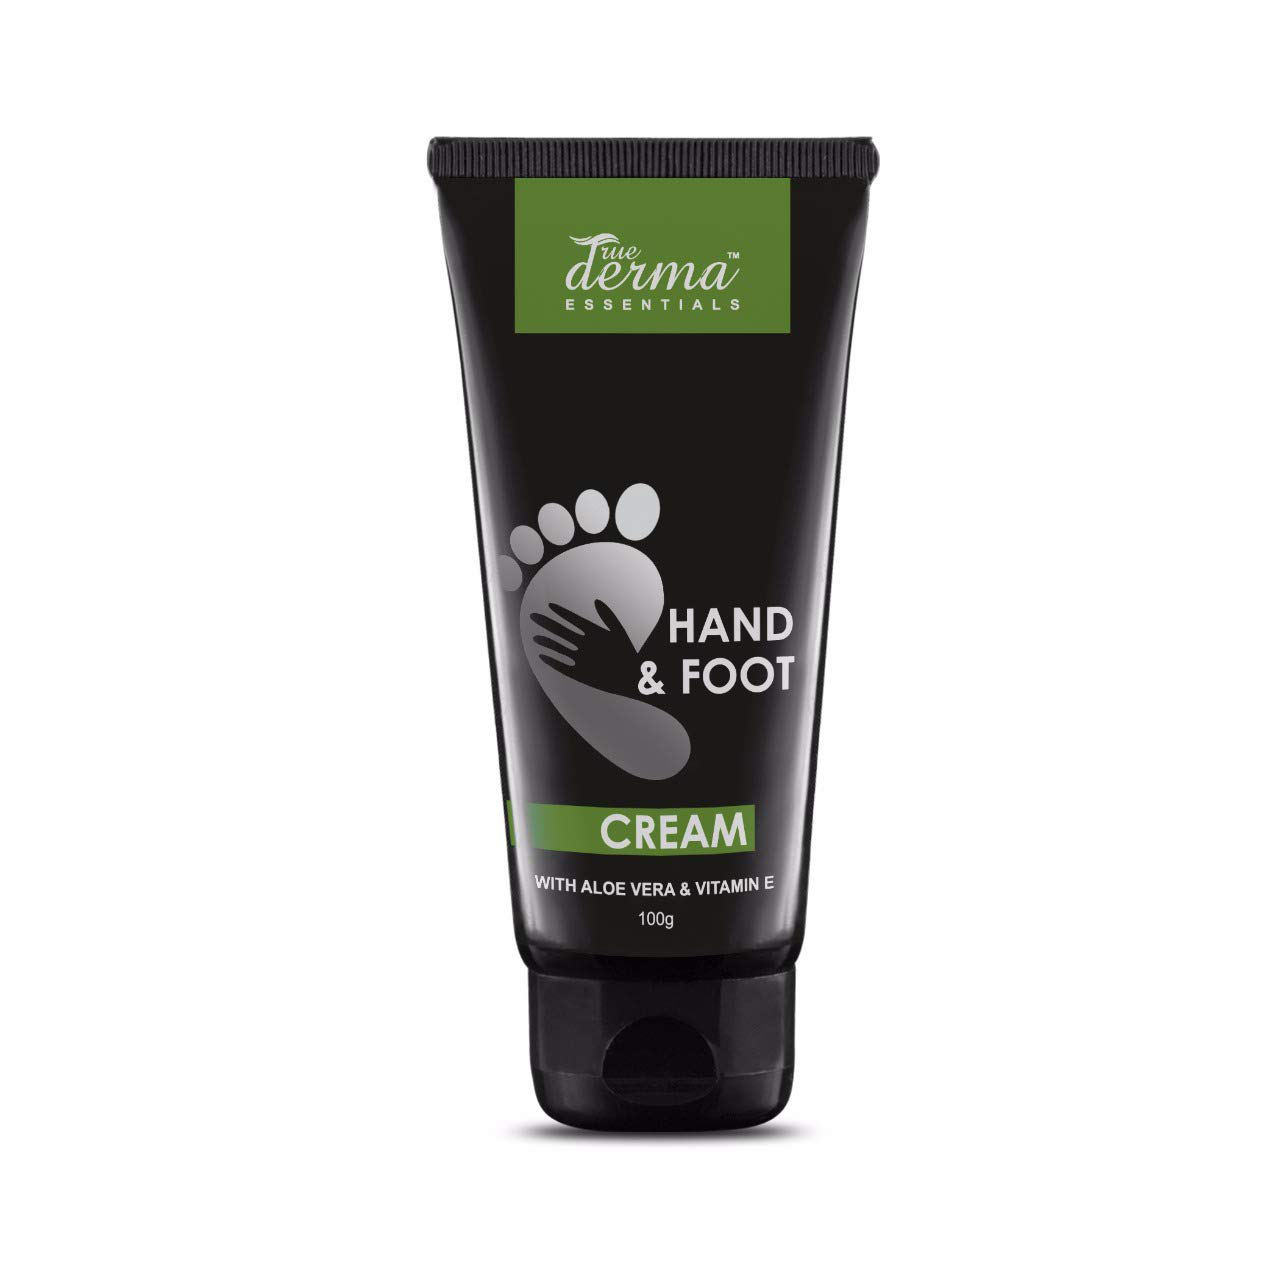 True Derma Essentials Hand & Foot Cream | Restores Natural Glow | Enriched With Aloe Vera & Vitamin-E | Hand And Foot Cream For Glowing Skin | For Women & Men - 100ml - Luster Cosmetics